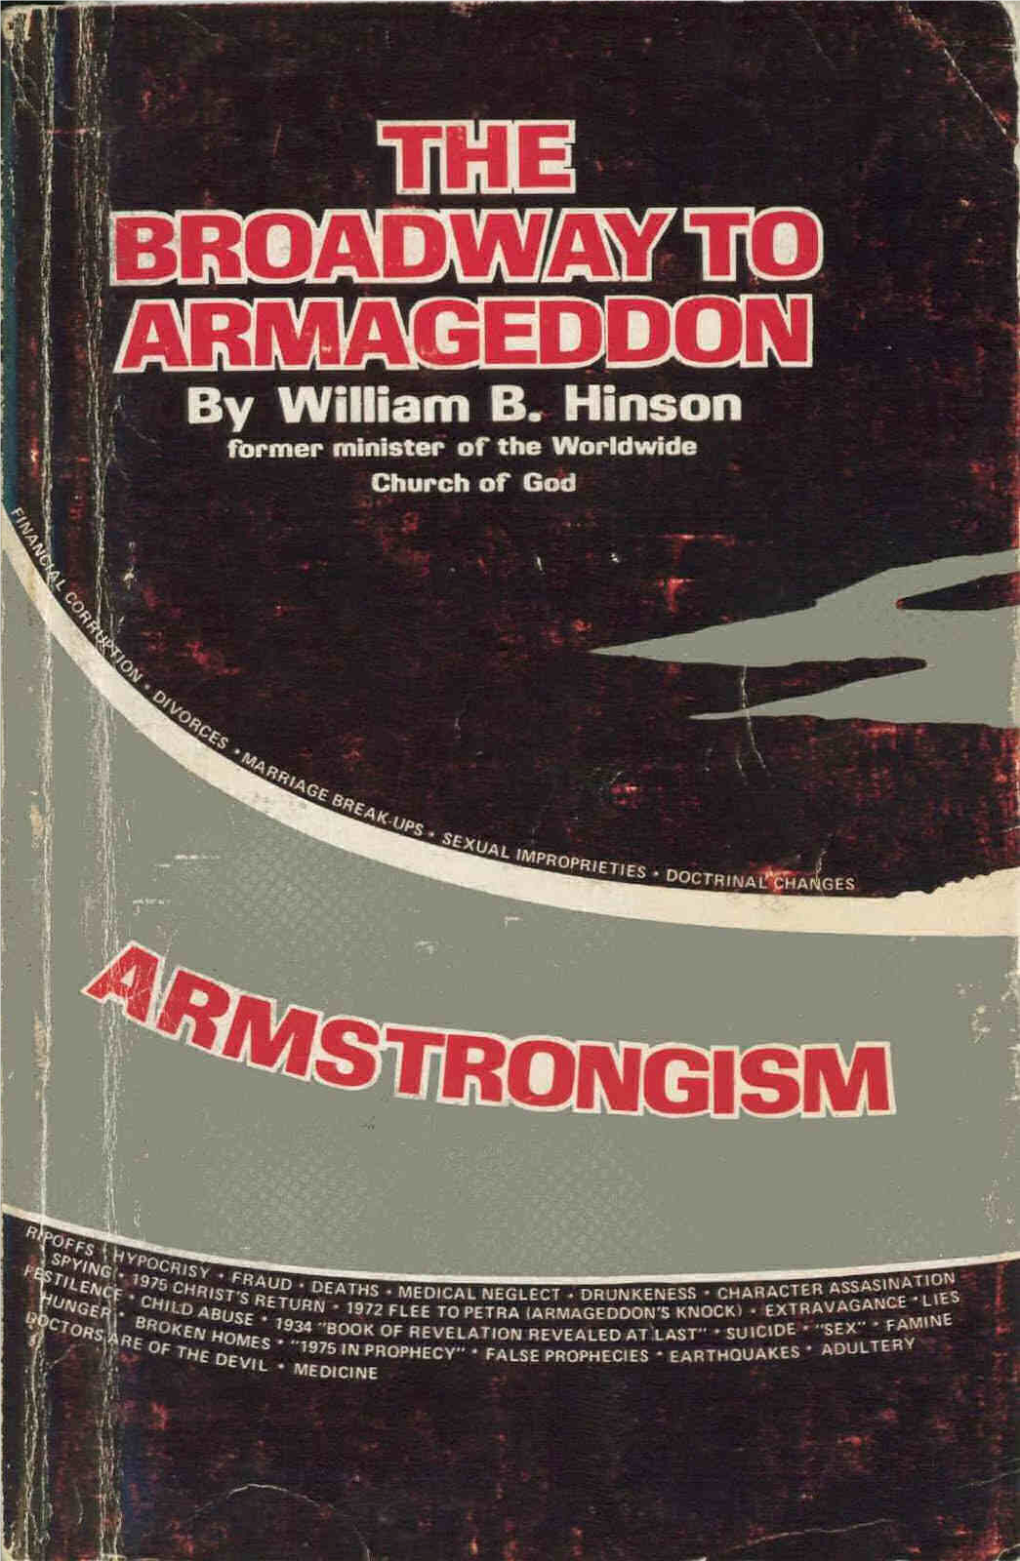 The Broadway to Armageddon by William